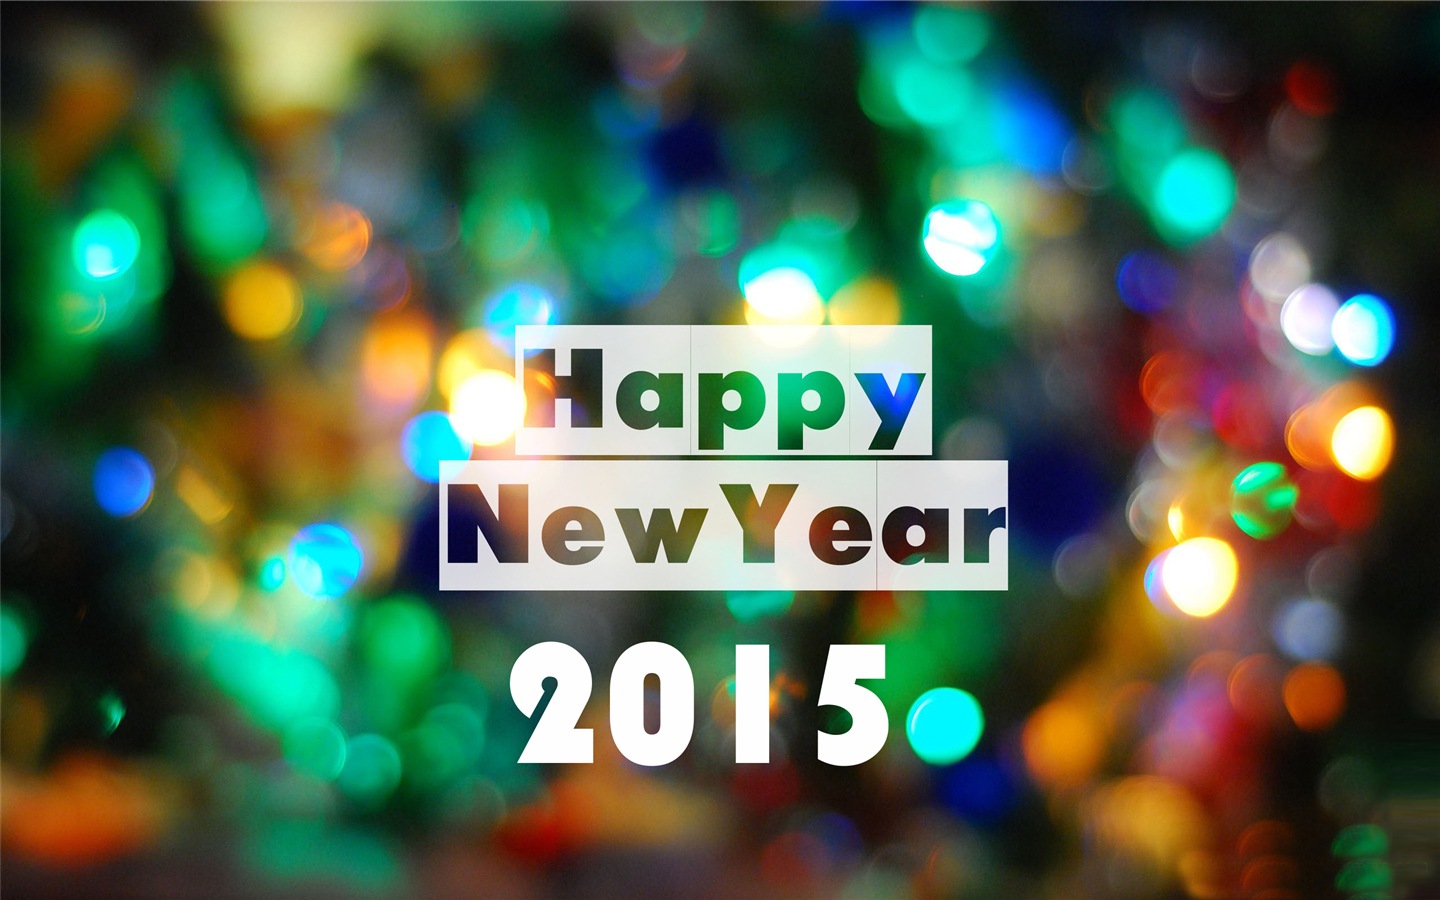 2015 New Year theme HD wallpapers (2) #14 - 1440x900